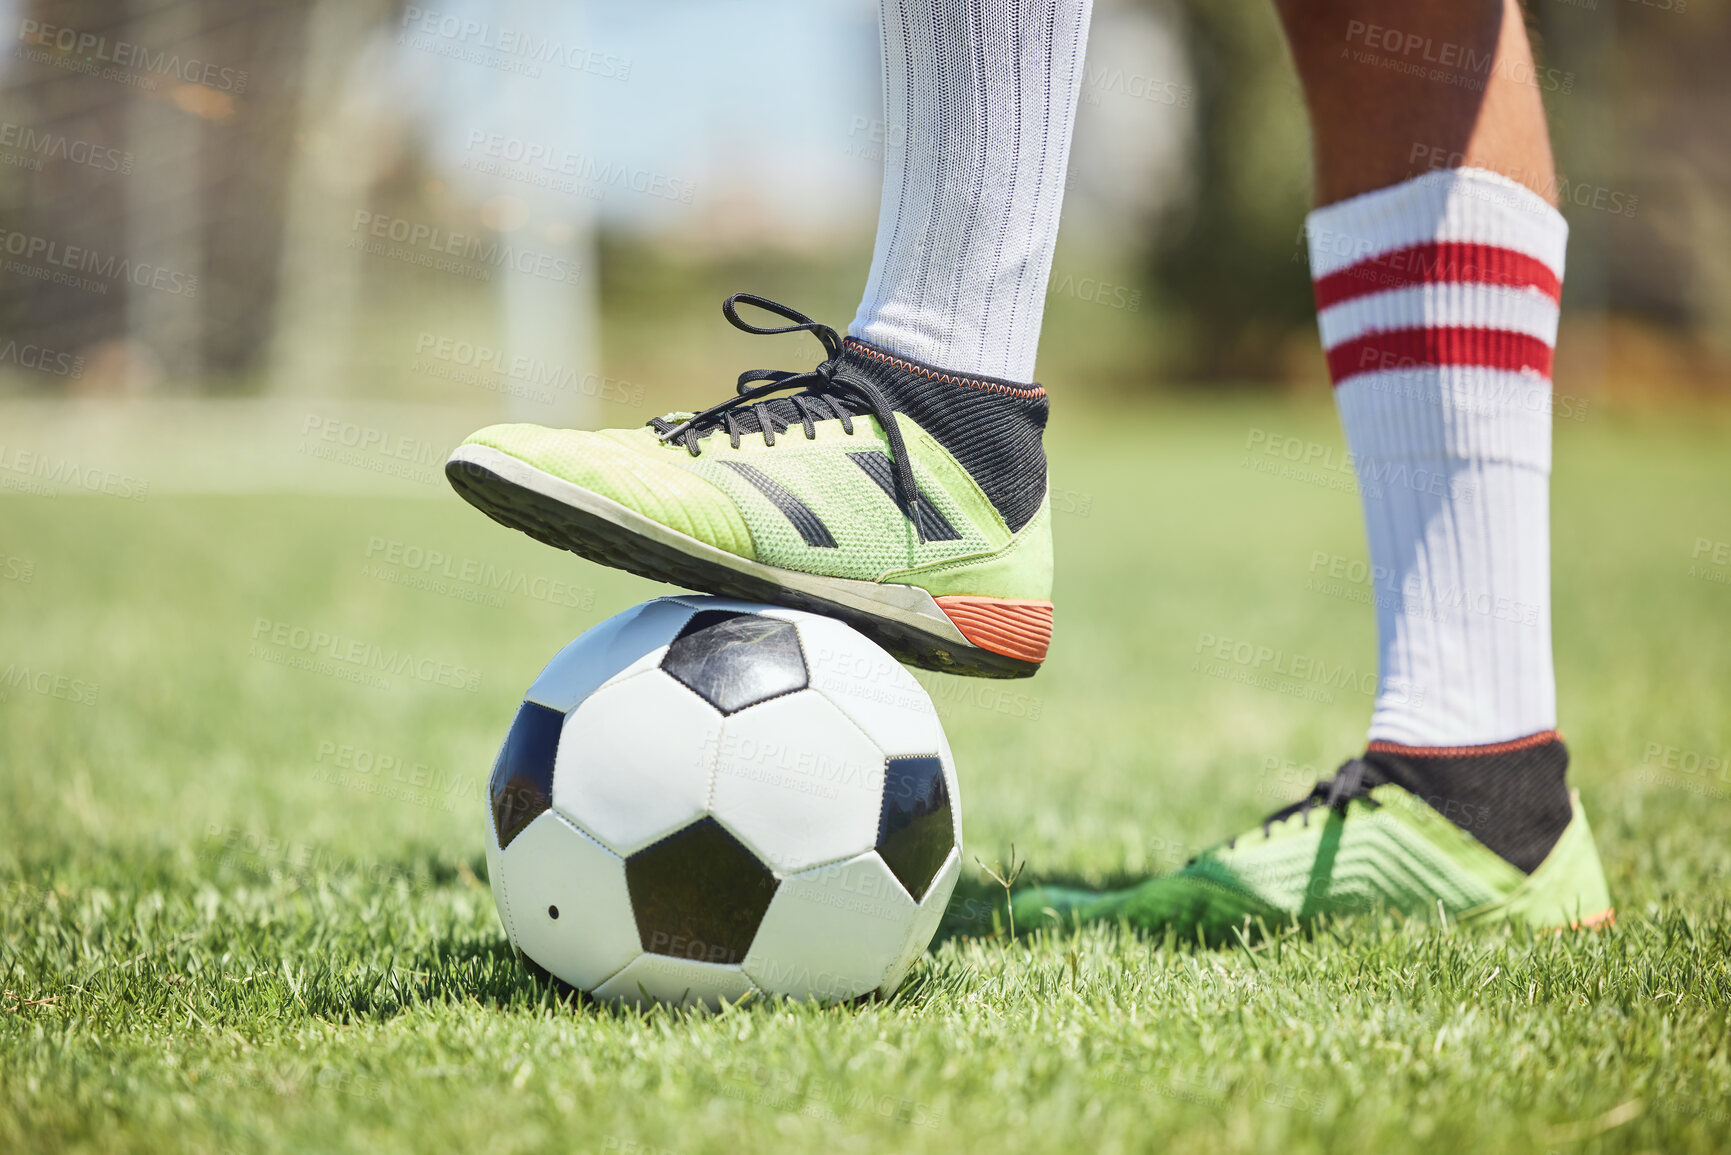 Buy stock photo Soccer ball, soccer player shoes and foot on field to kick off, competition games and sports training on stadium grass pitch. Football player feet, man athlete action and power to score goals on turf